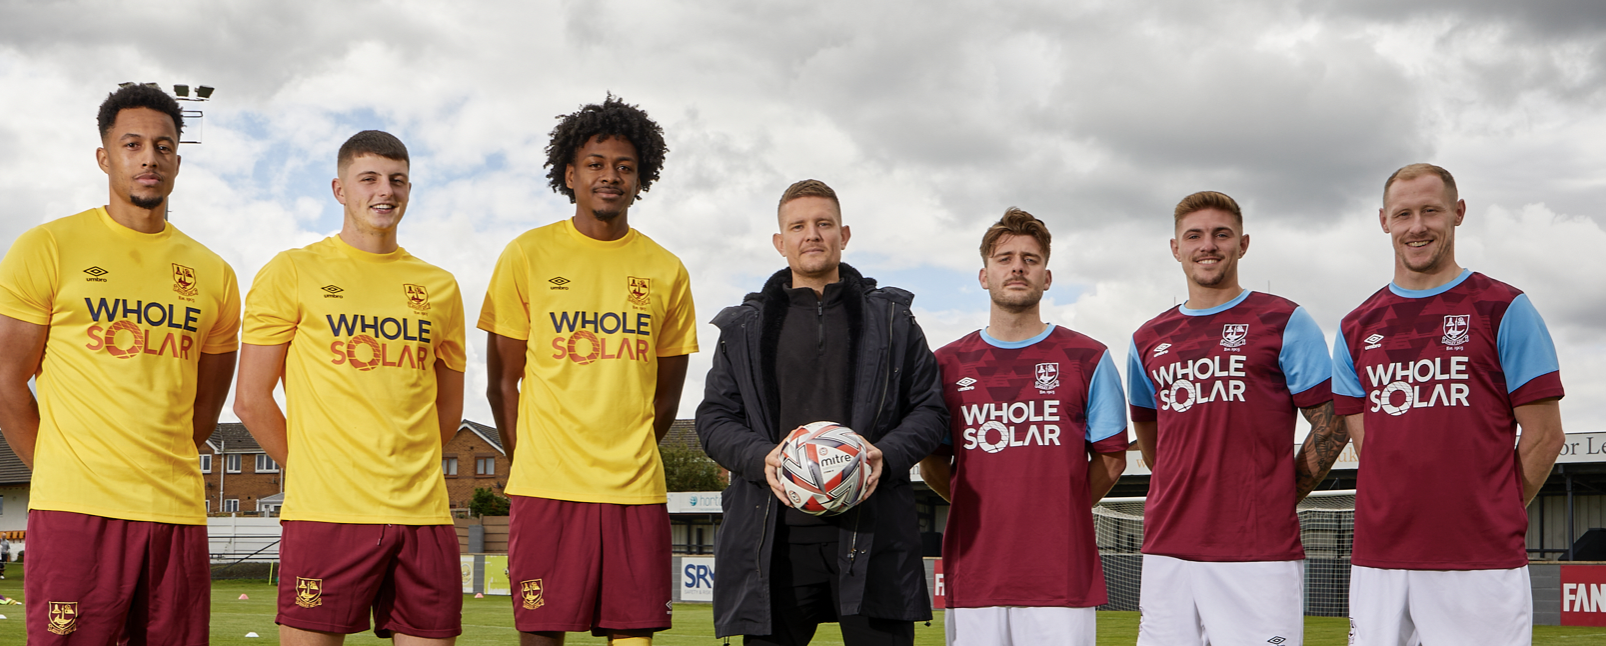 Wholesolar signs shirt deal with Emley AFC